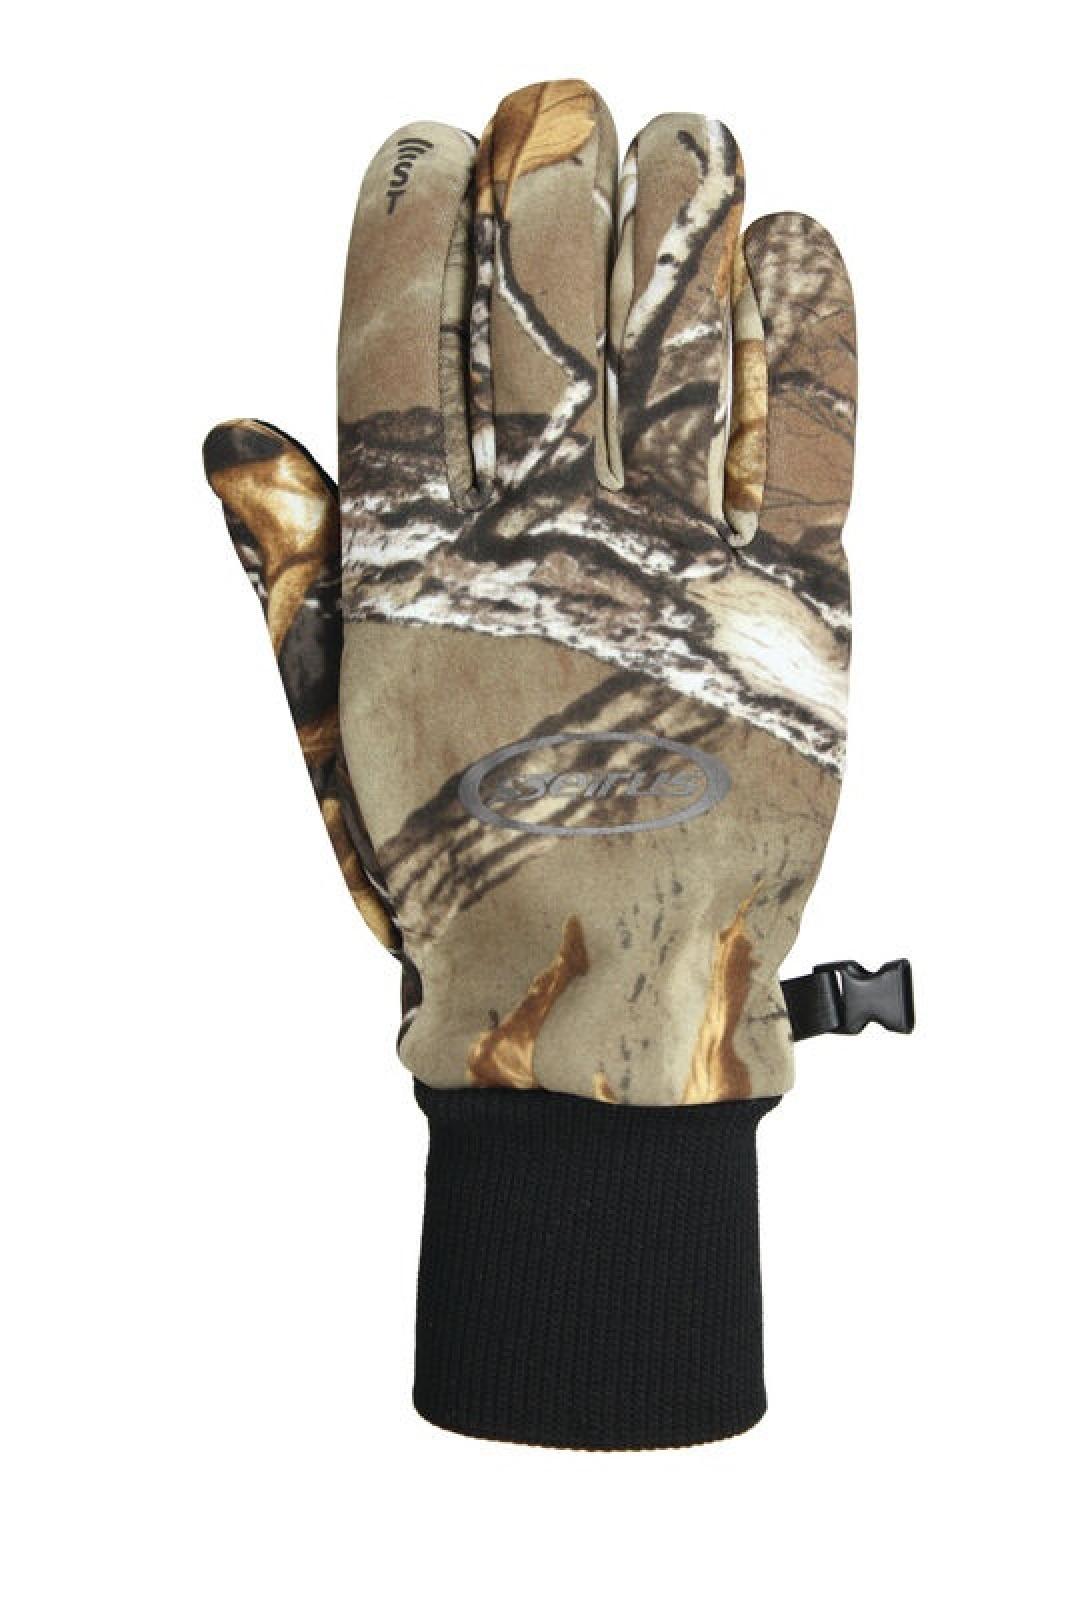 Seirus Soundtouch All Weather Realtree Glove